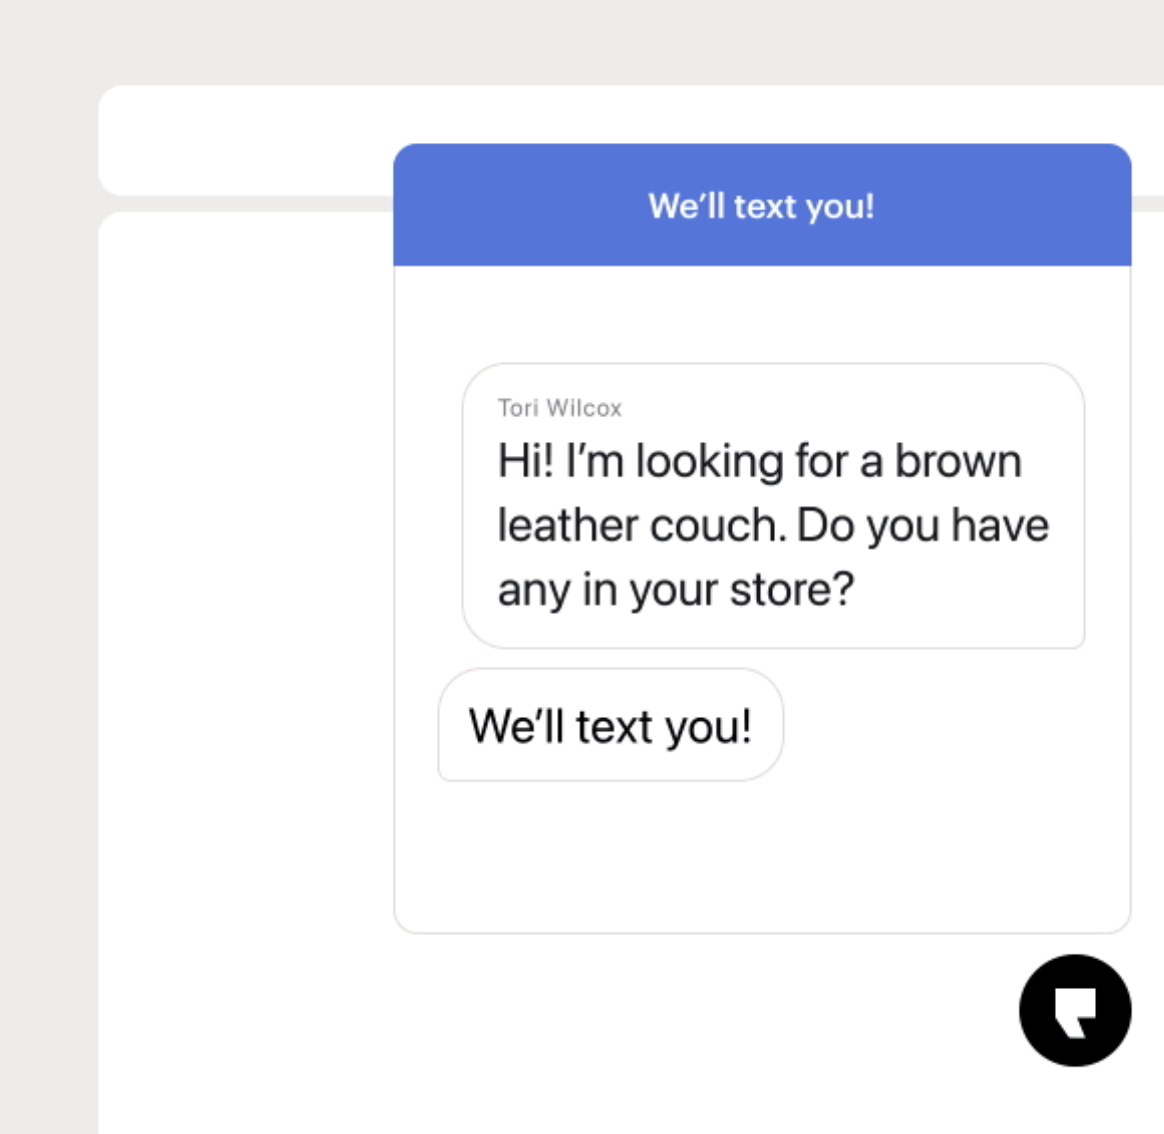 example of ai in chatbots or web chat through podium